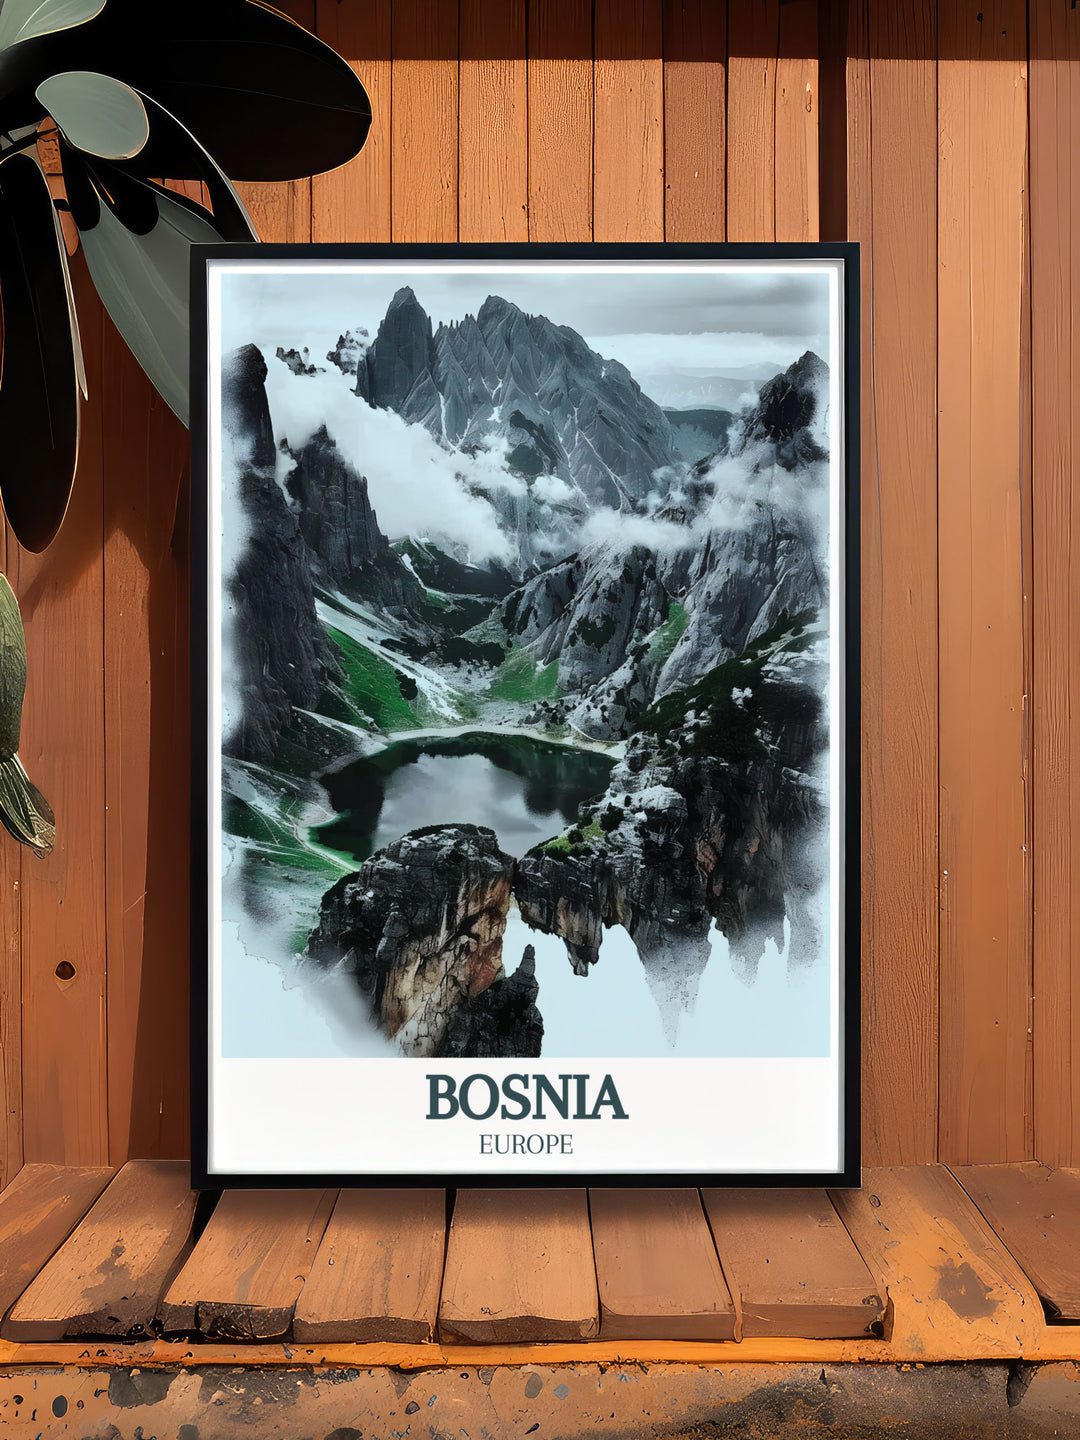 Discover the charm of Sutjeska National Park with this Bosnia Wall Art featuring Maglić mountain and Trnovačko Lake. This Bosnia Photo print captures the serene landscape and majestic peaks making it a perfect addition to any art collection or home decor.